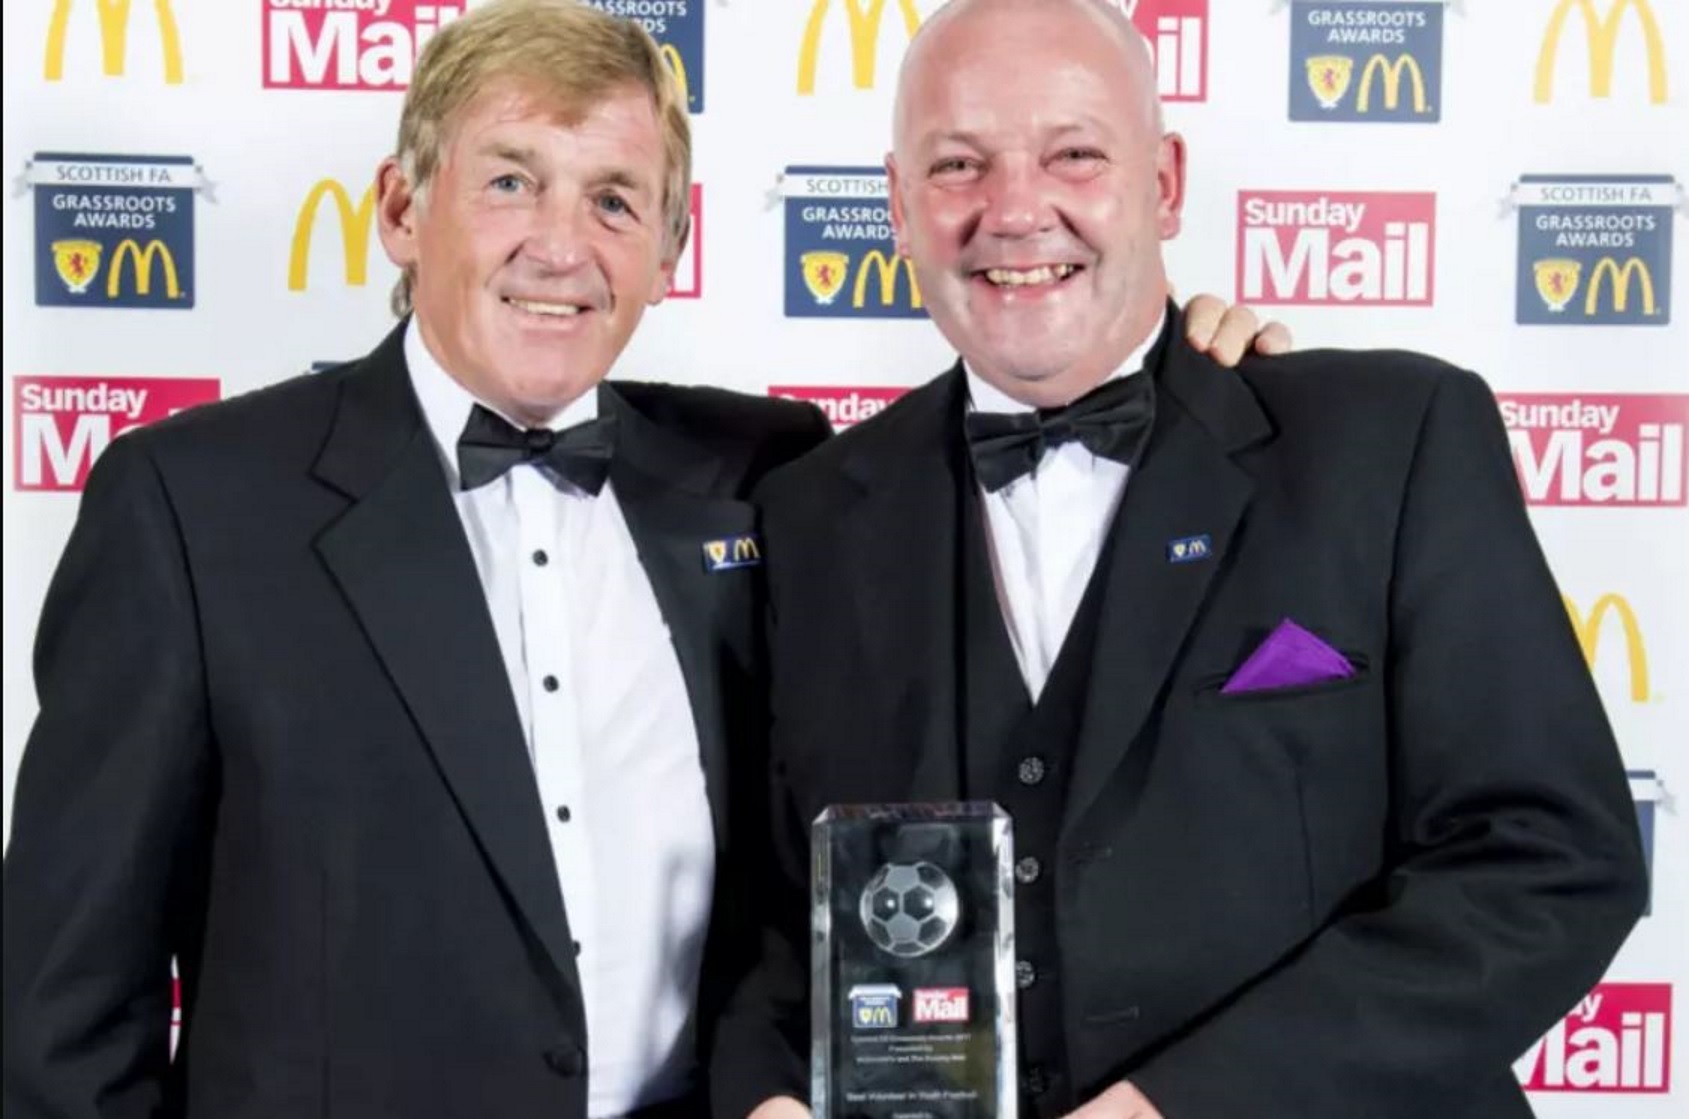 Phil Purves accepting his 2017 Scottish FA Grassroots Award from Kenny Dalglish